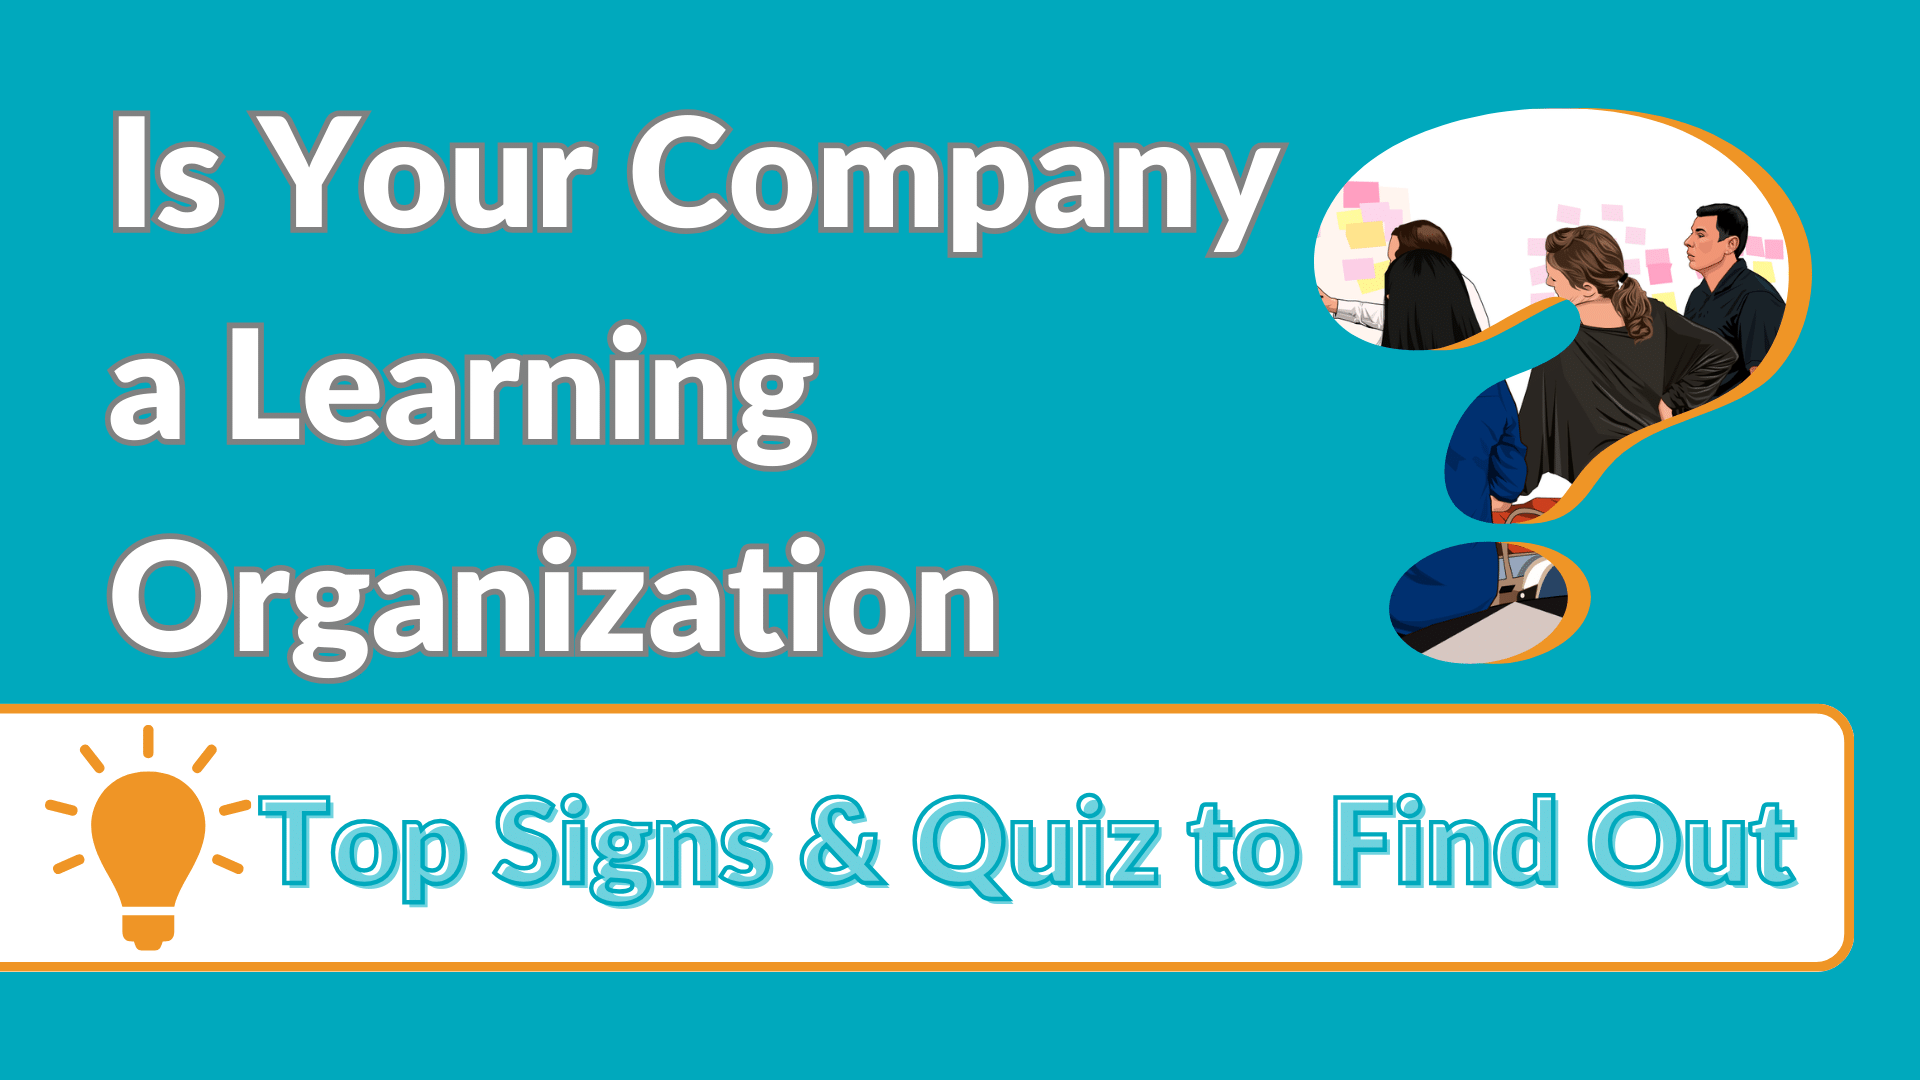 Is Your Company a Learning Organization? Top Signs & Quiz to Find Out